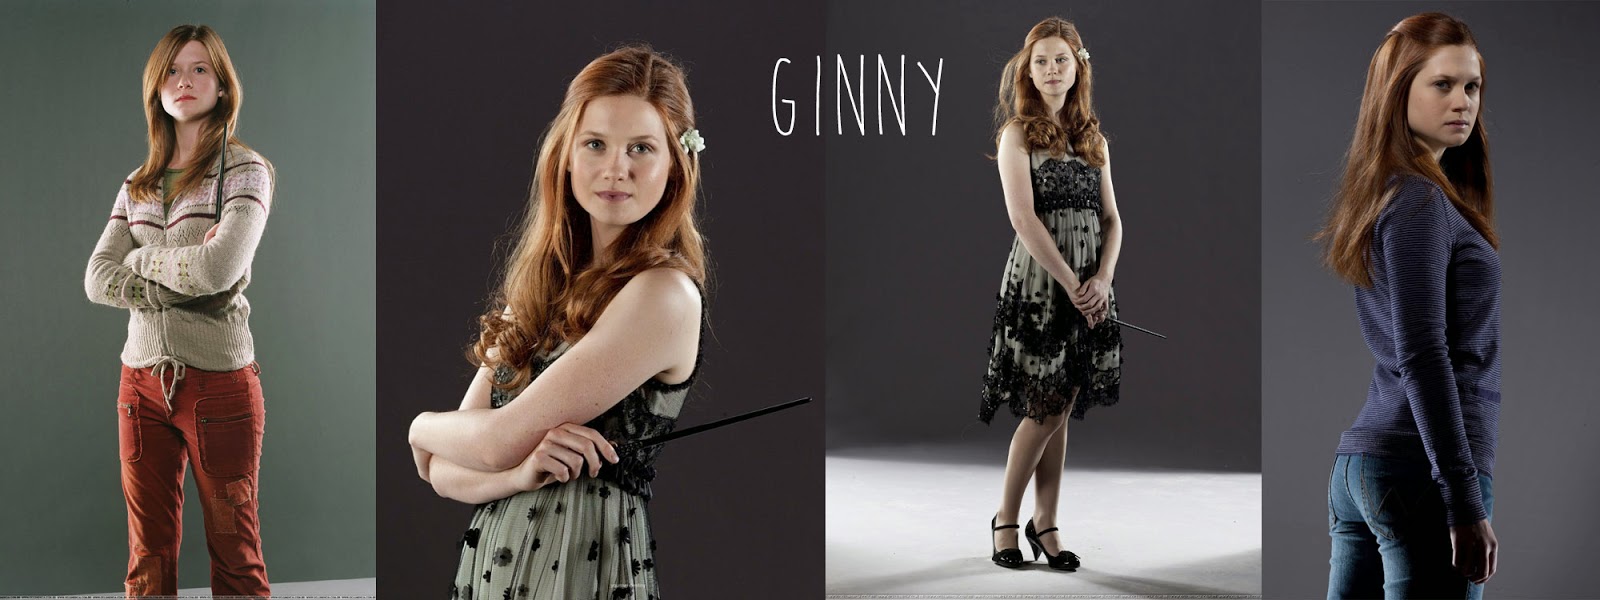 Ginny Weasley (Bonnie Wright) is a Gryffindor and the youngest of all the W...